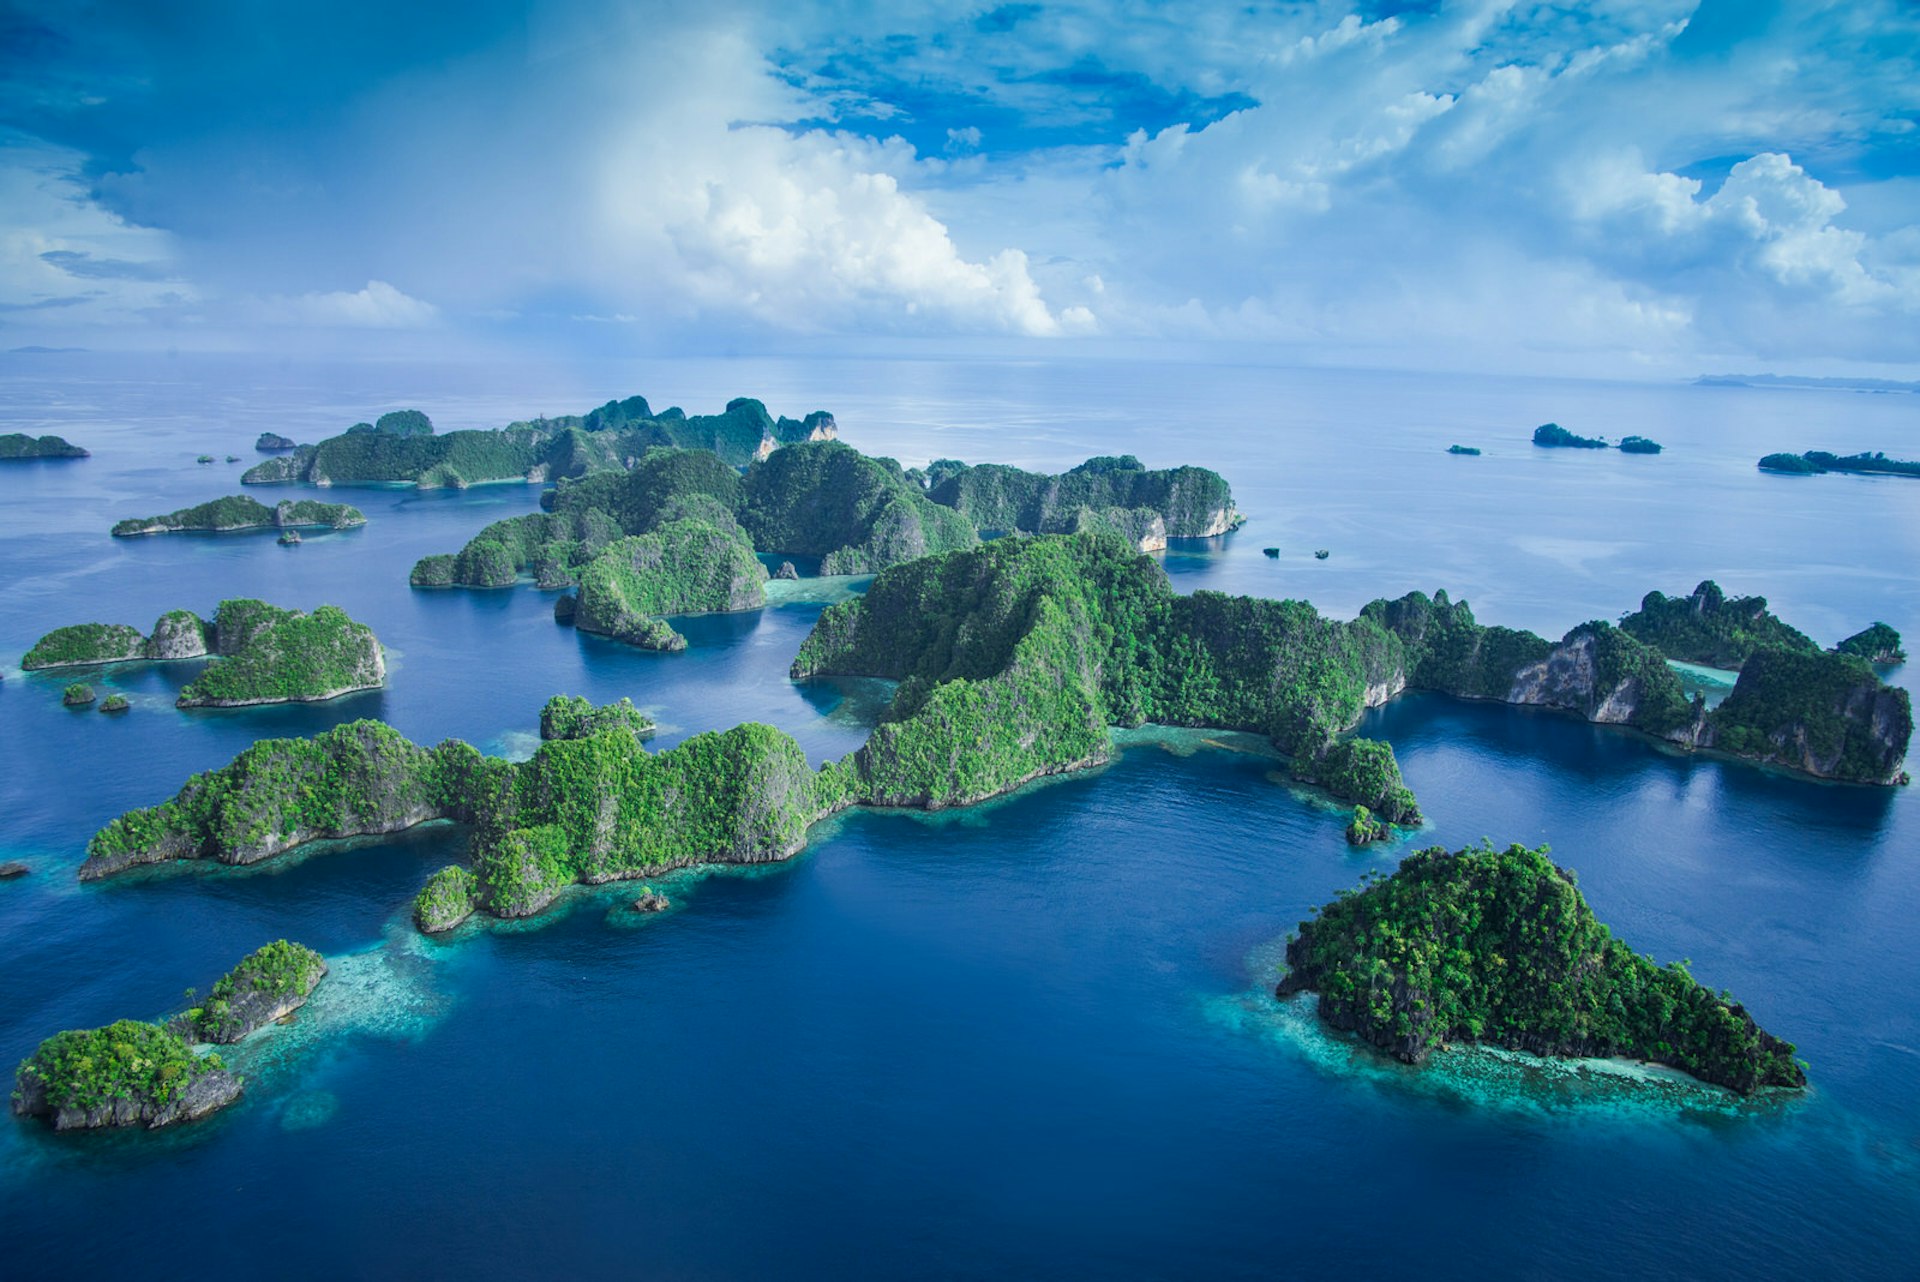 A number of lush green islands protrude from turquoise waters © Jones/Shimlock-Secret Sea Visions / Getty Images